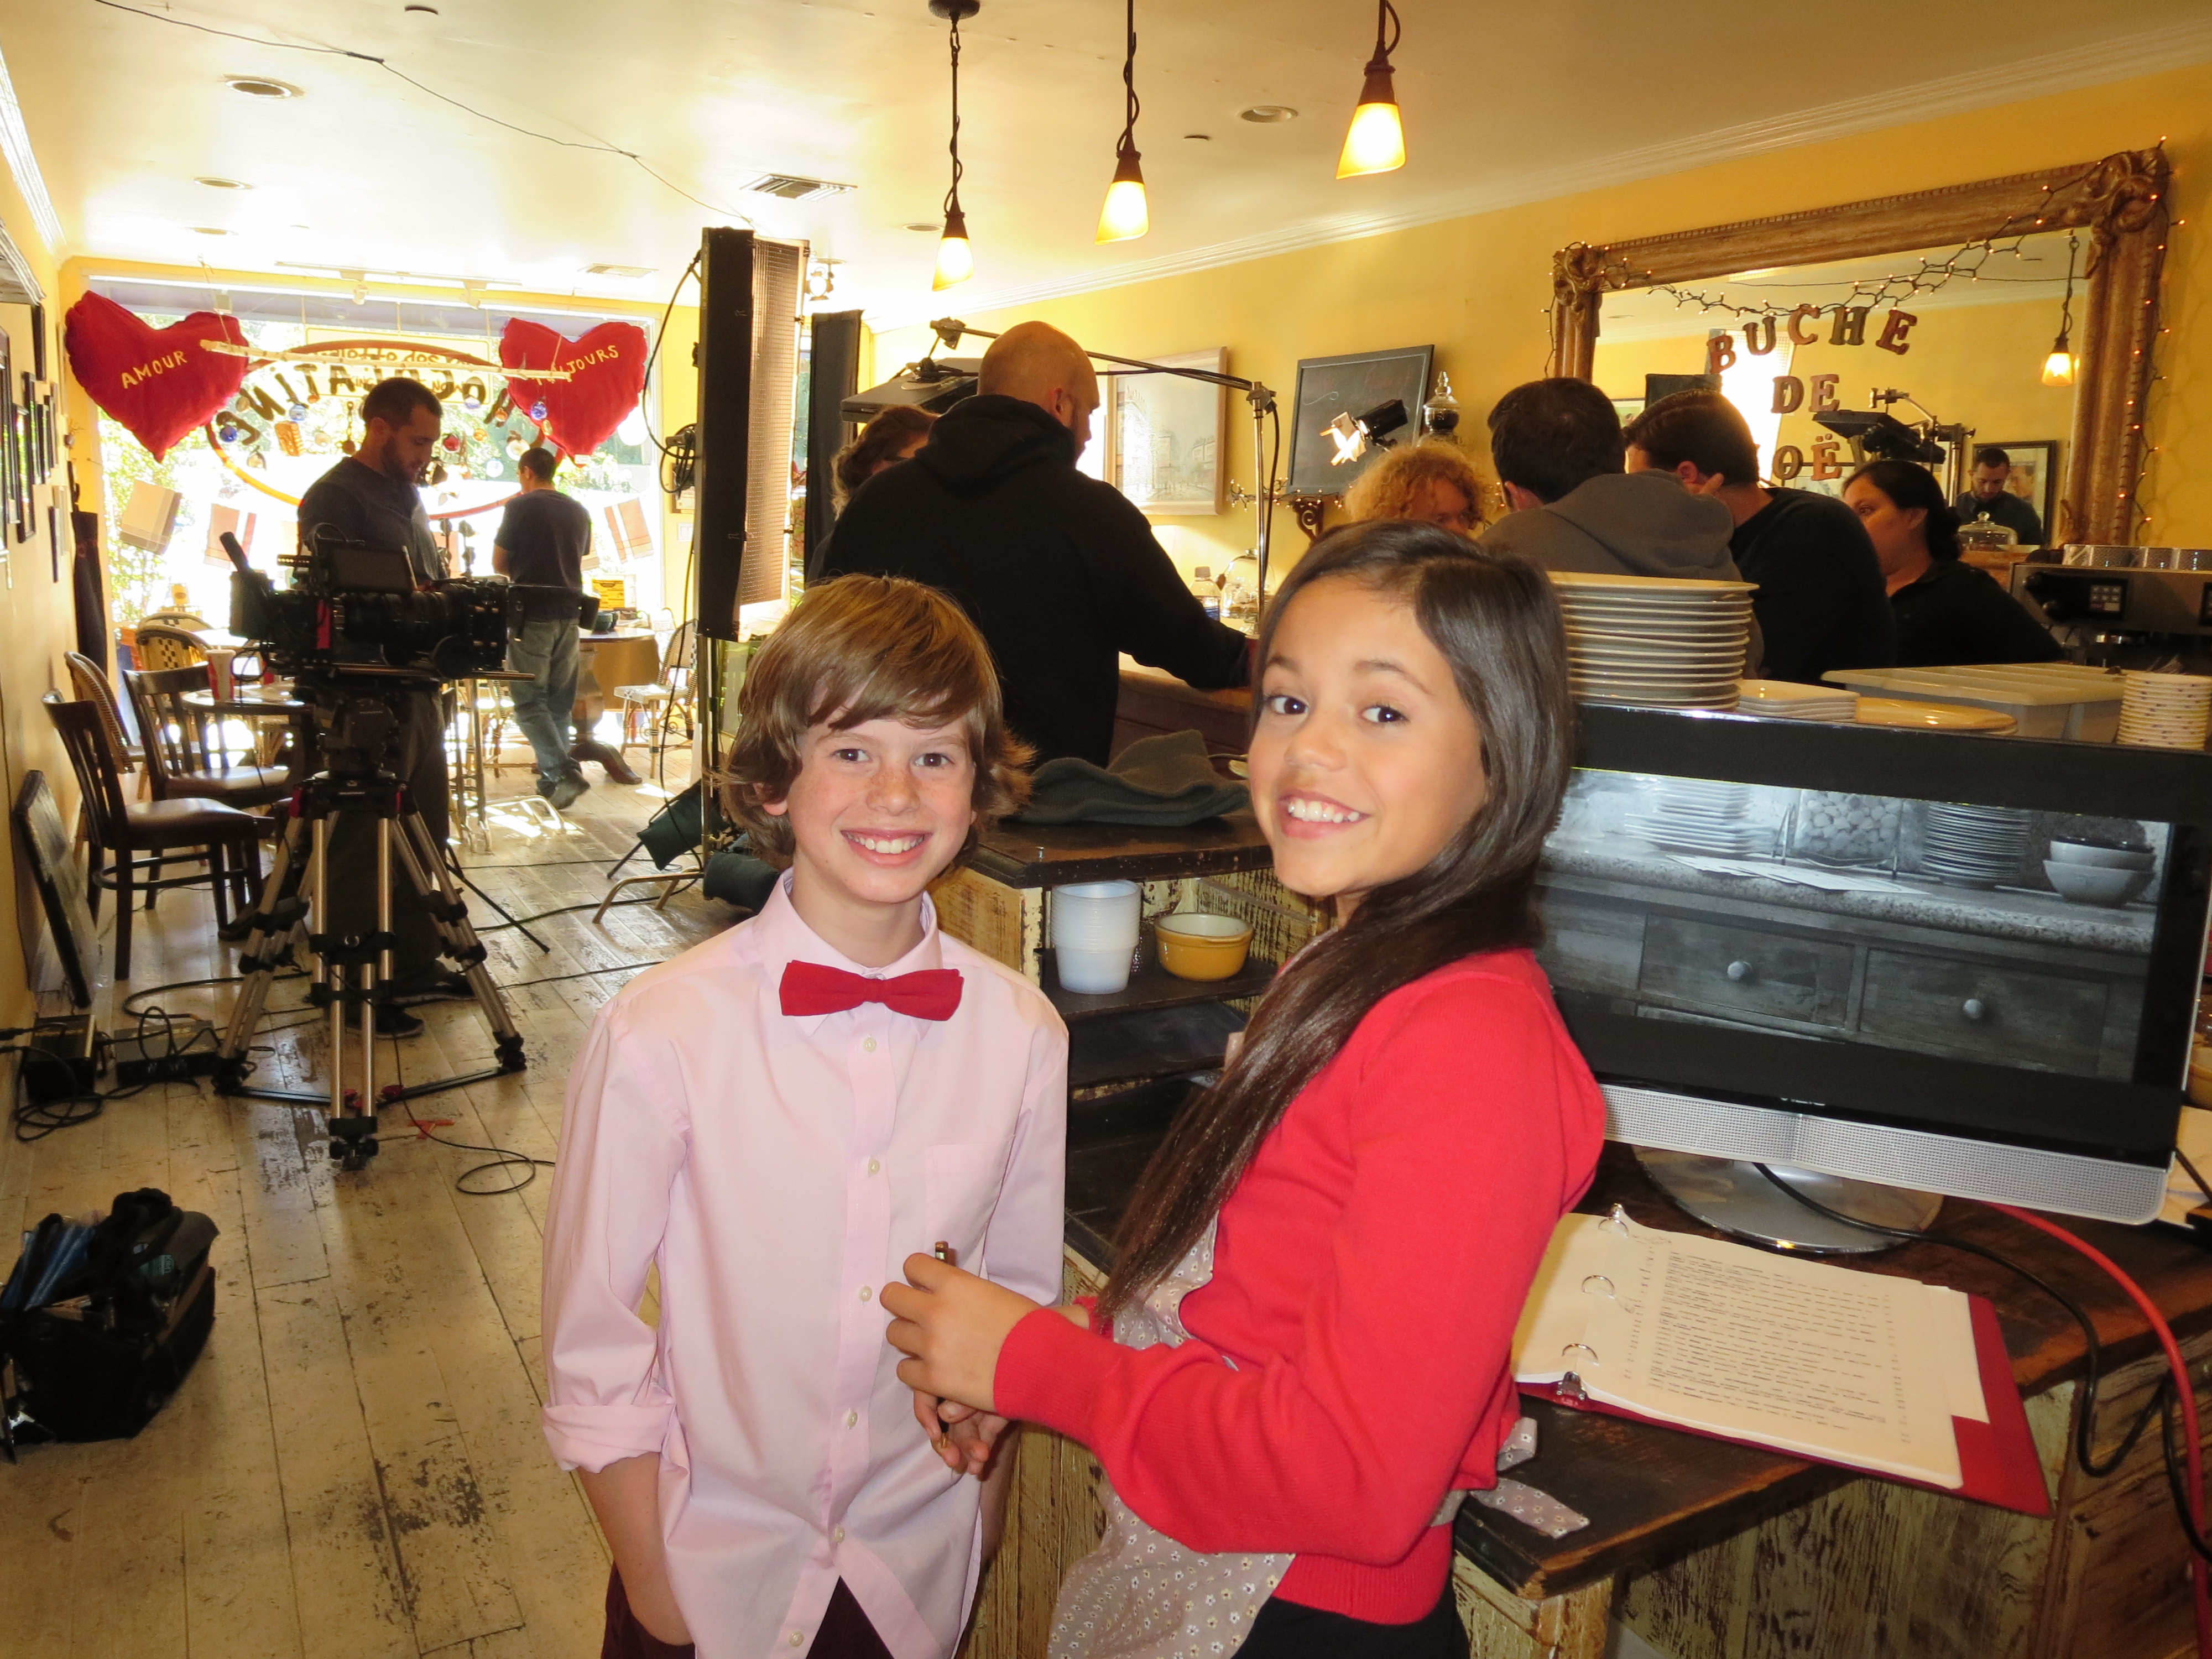 Drew Justice with Jenna Ortega on set of Young Love